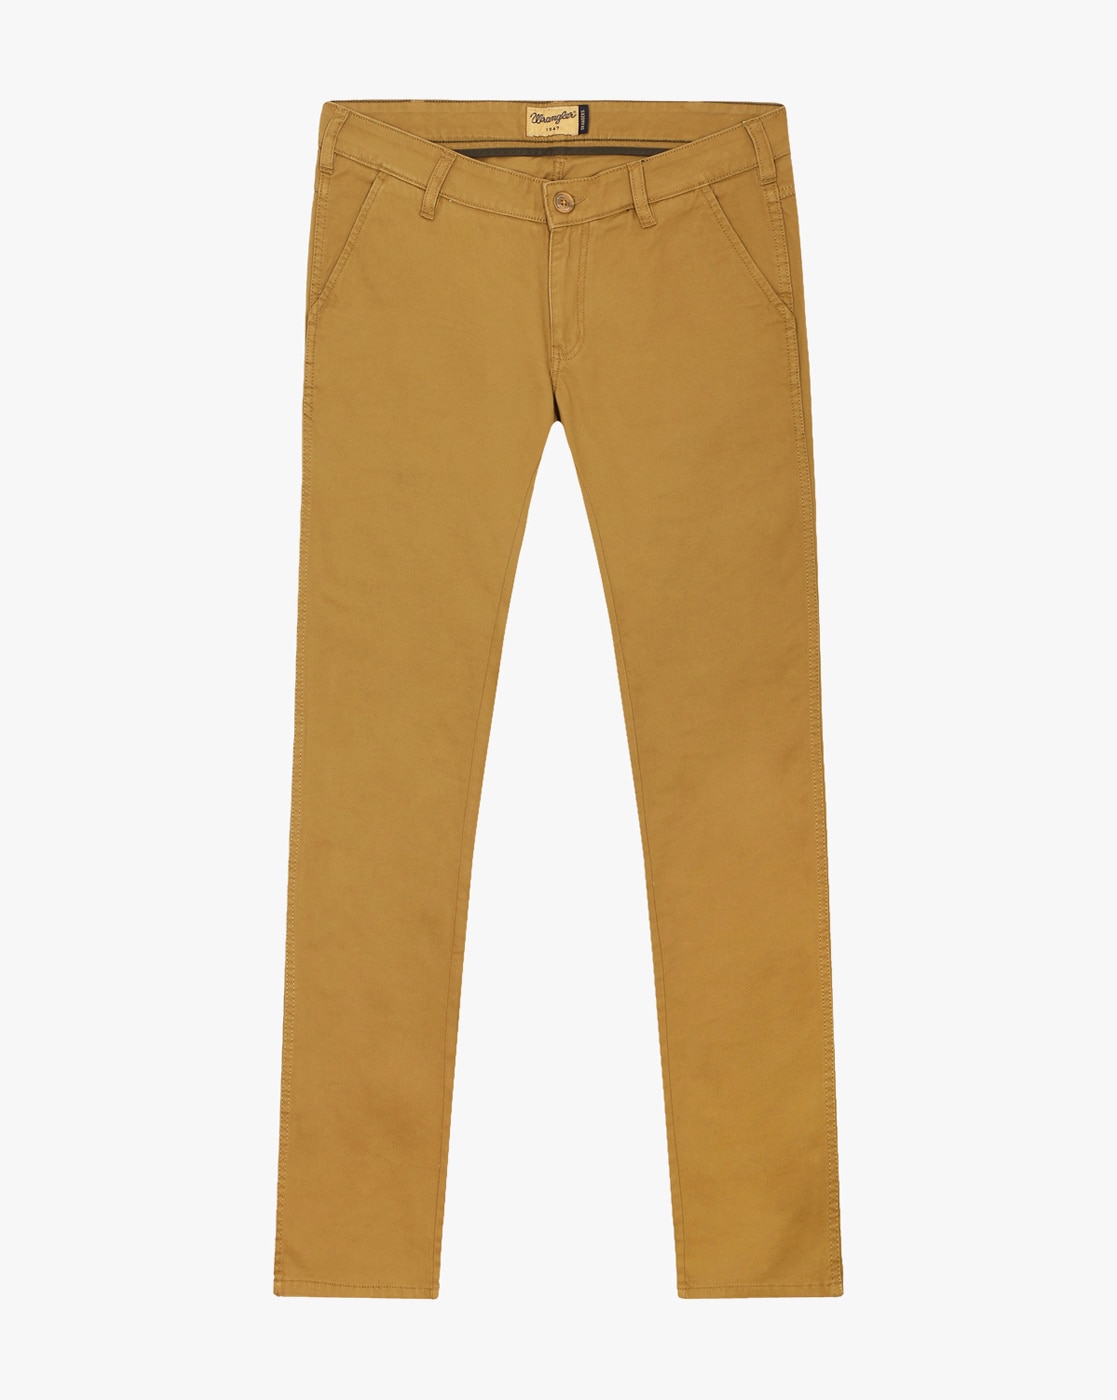 Buy Wrangler Khaki Cotton Trousers from top Brands at Best Prices Online in  India  Tata CLiQ